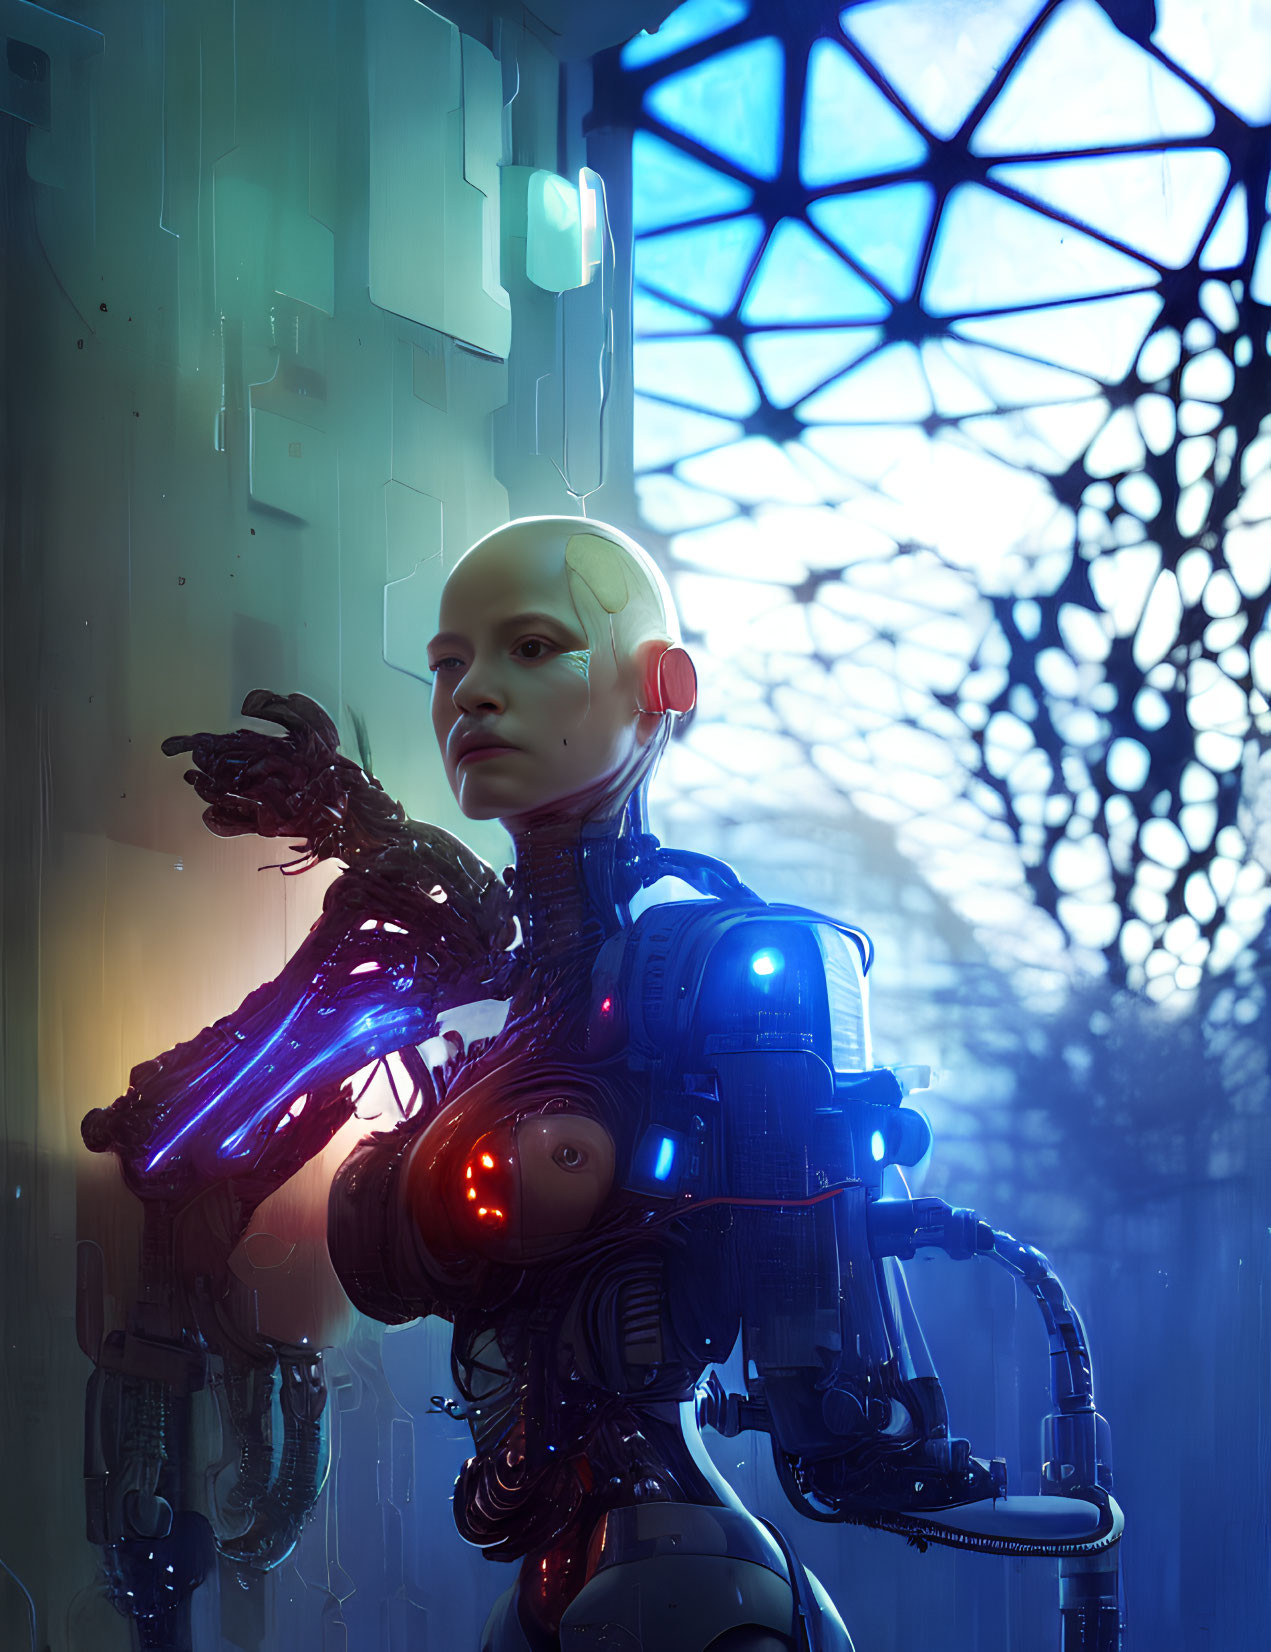 Pensive humanoid robot with exposed mechanical parts and glowing blue lights by geometric-patterned window